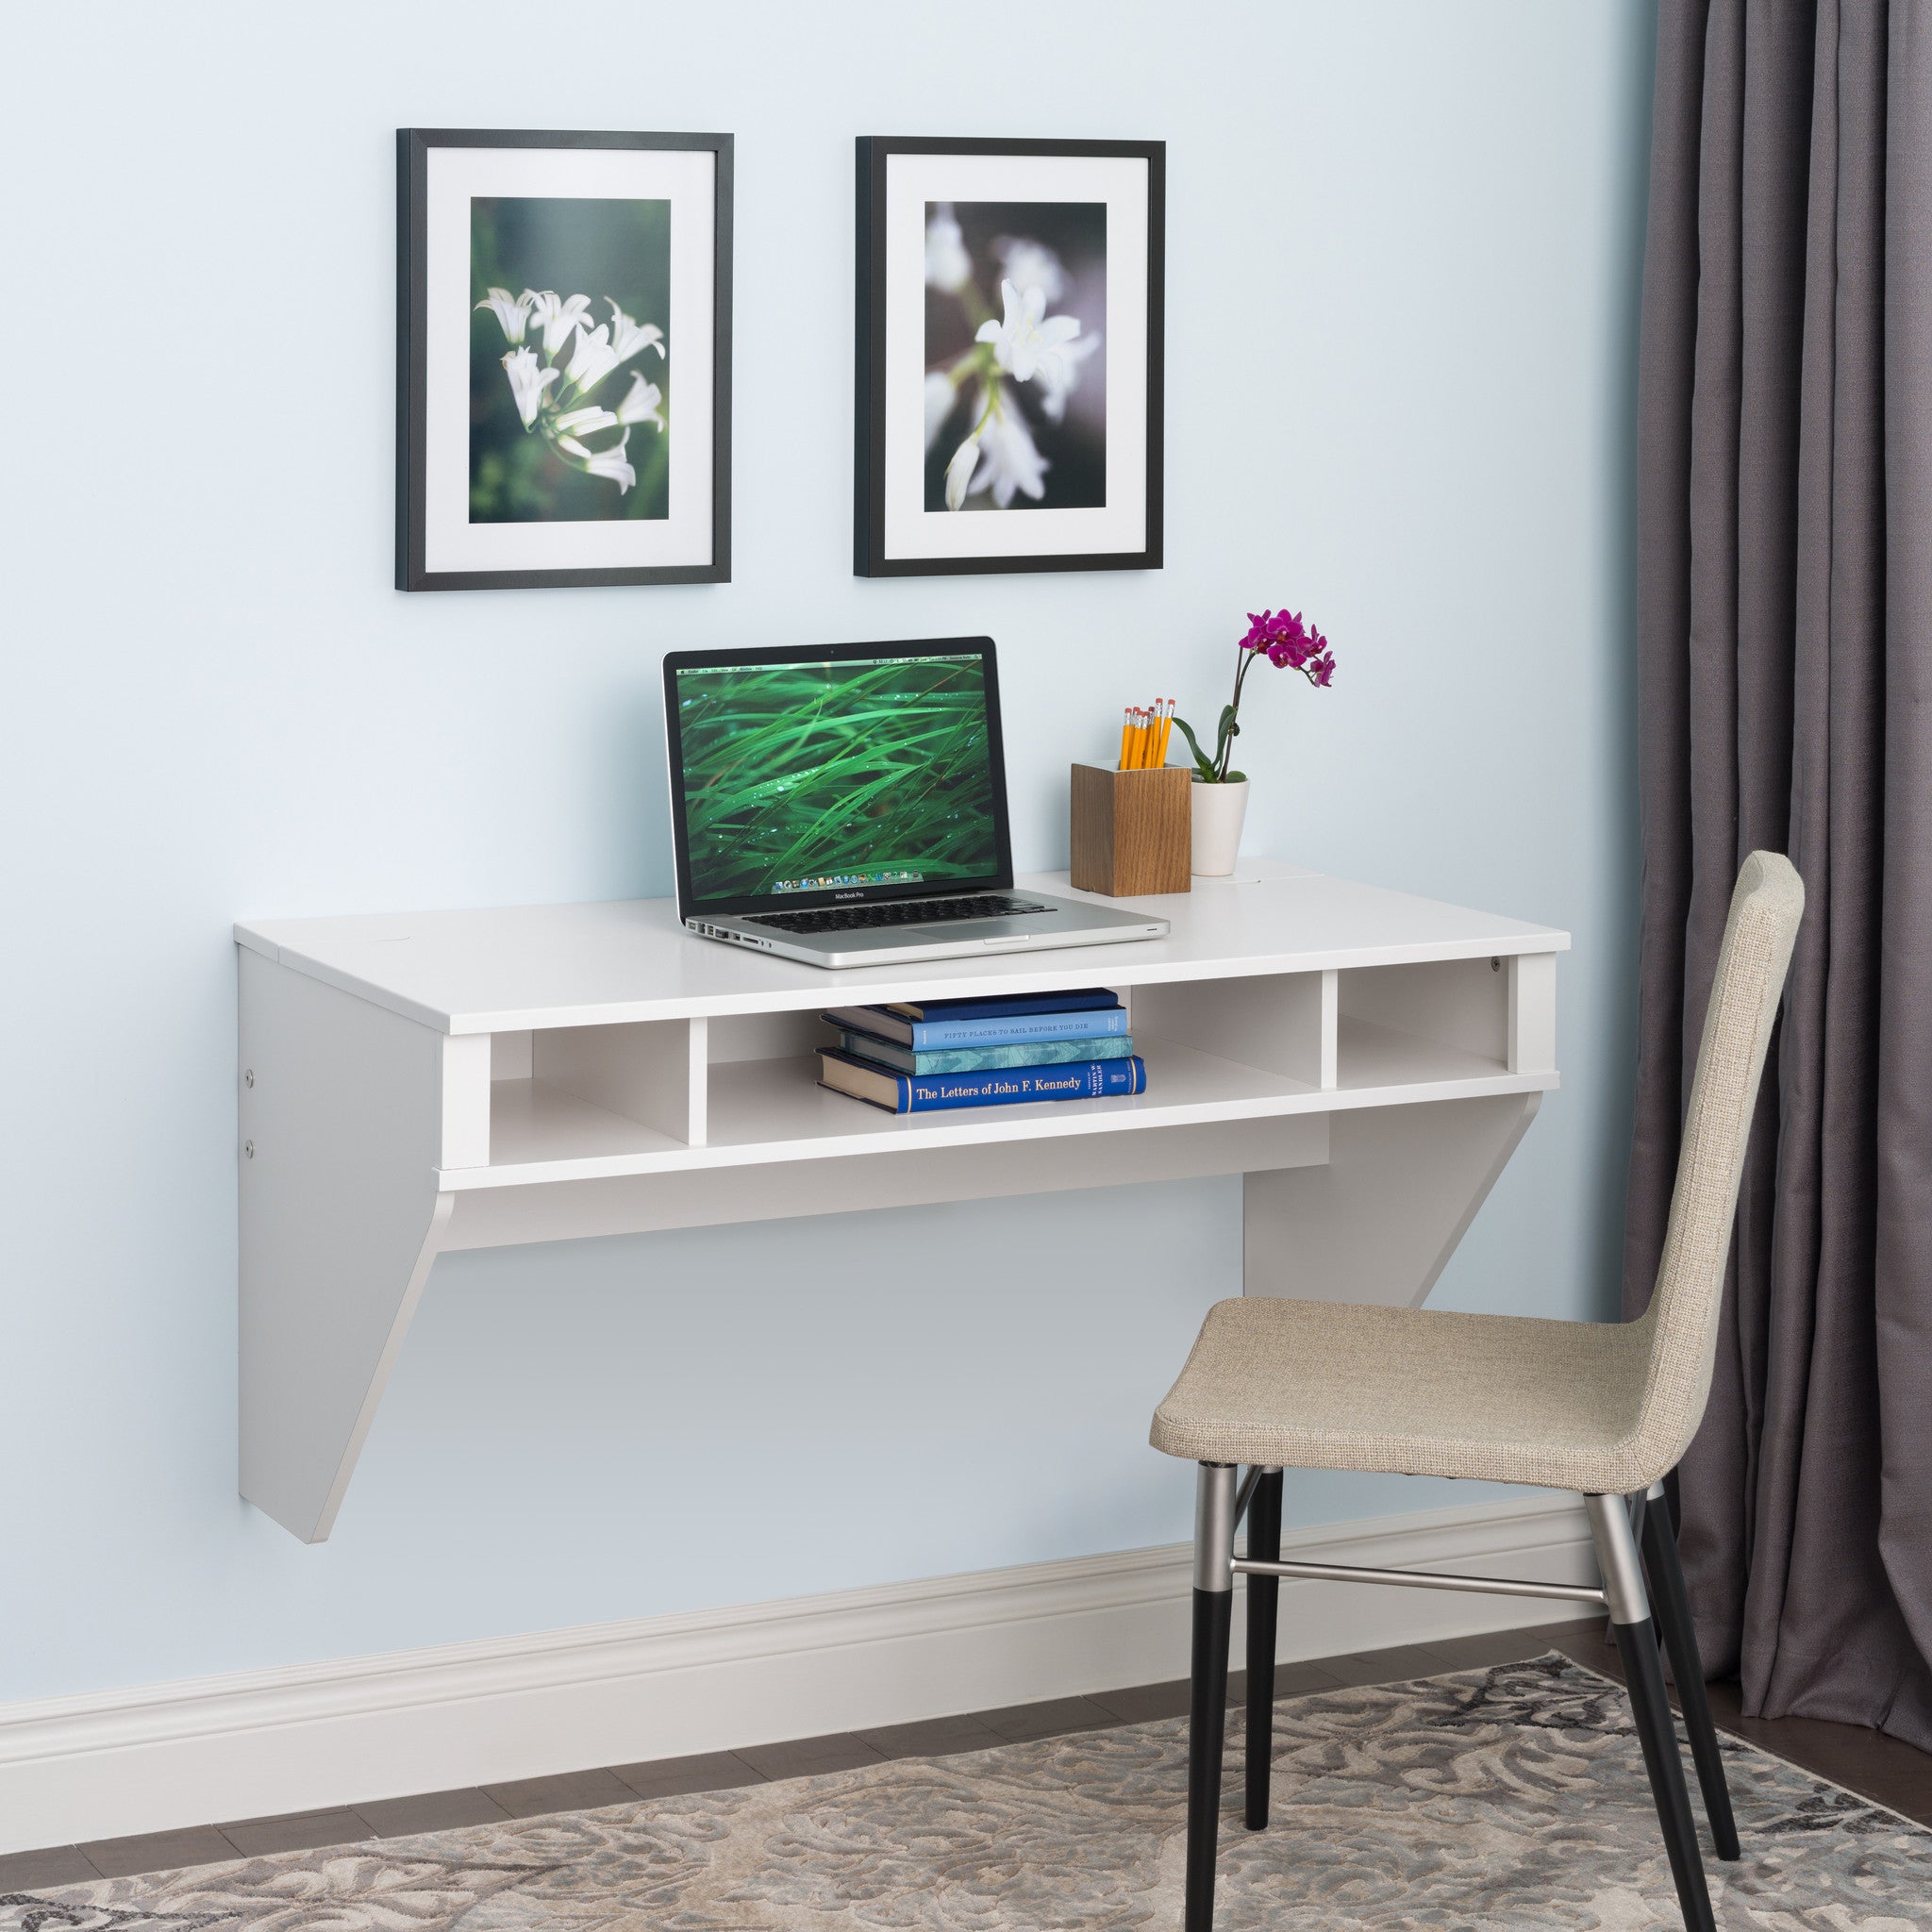  Wall Mount Desk for Small Space